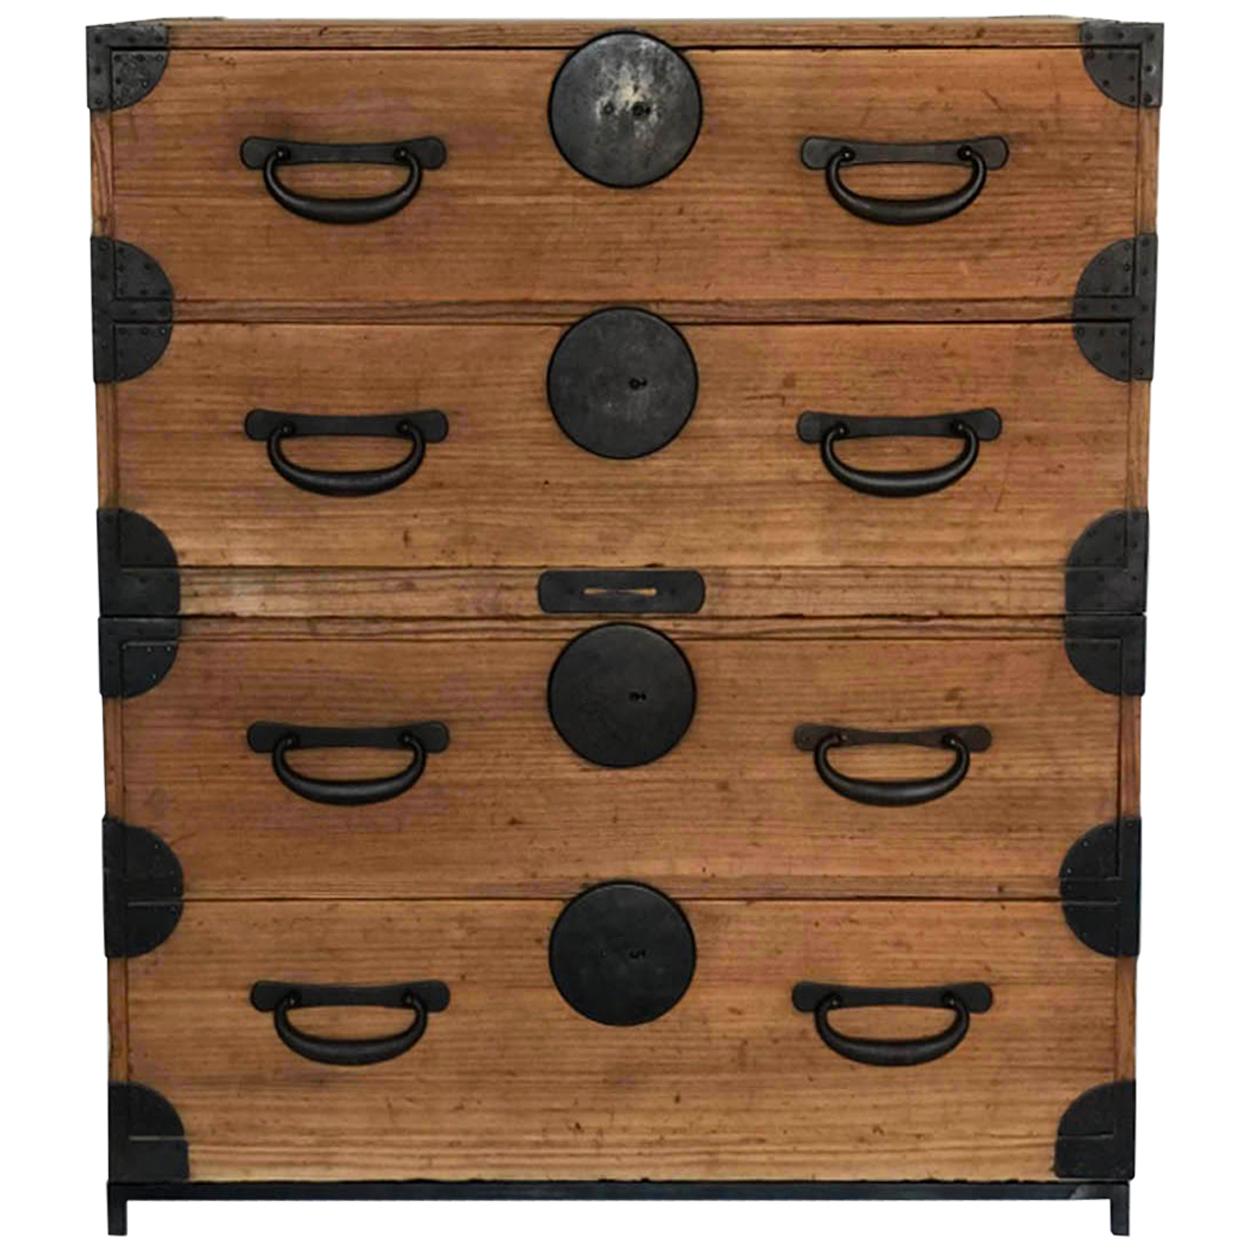 19th Century Japanese Tansu, Chest of Drawers